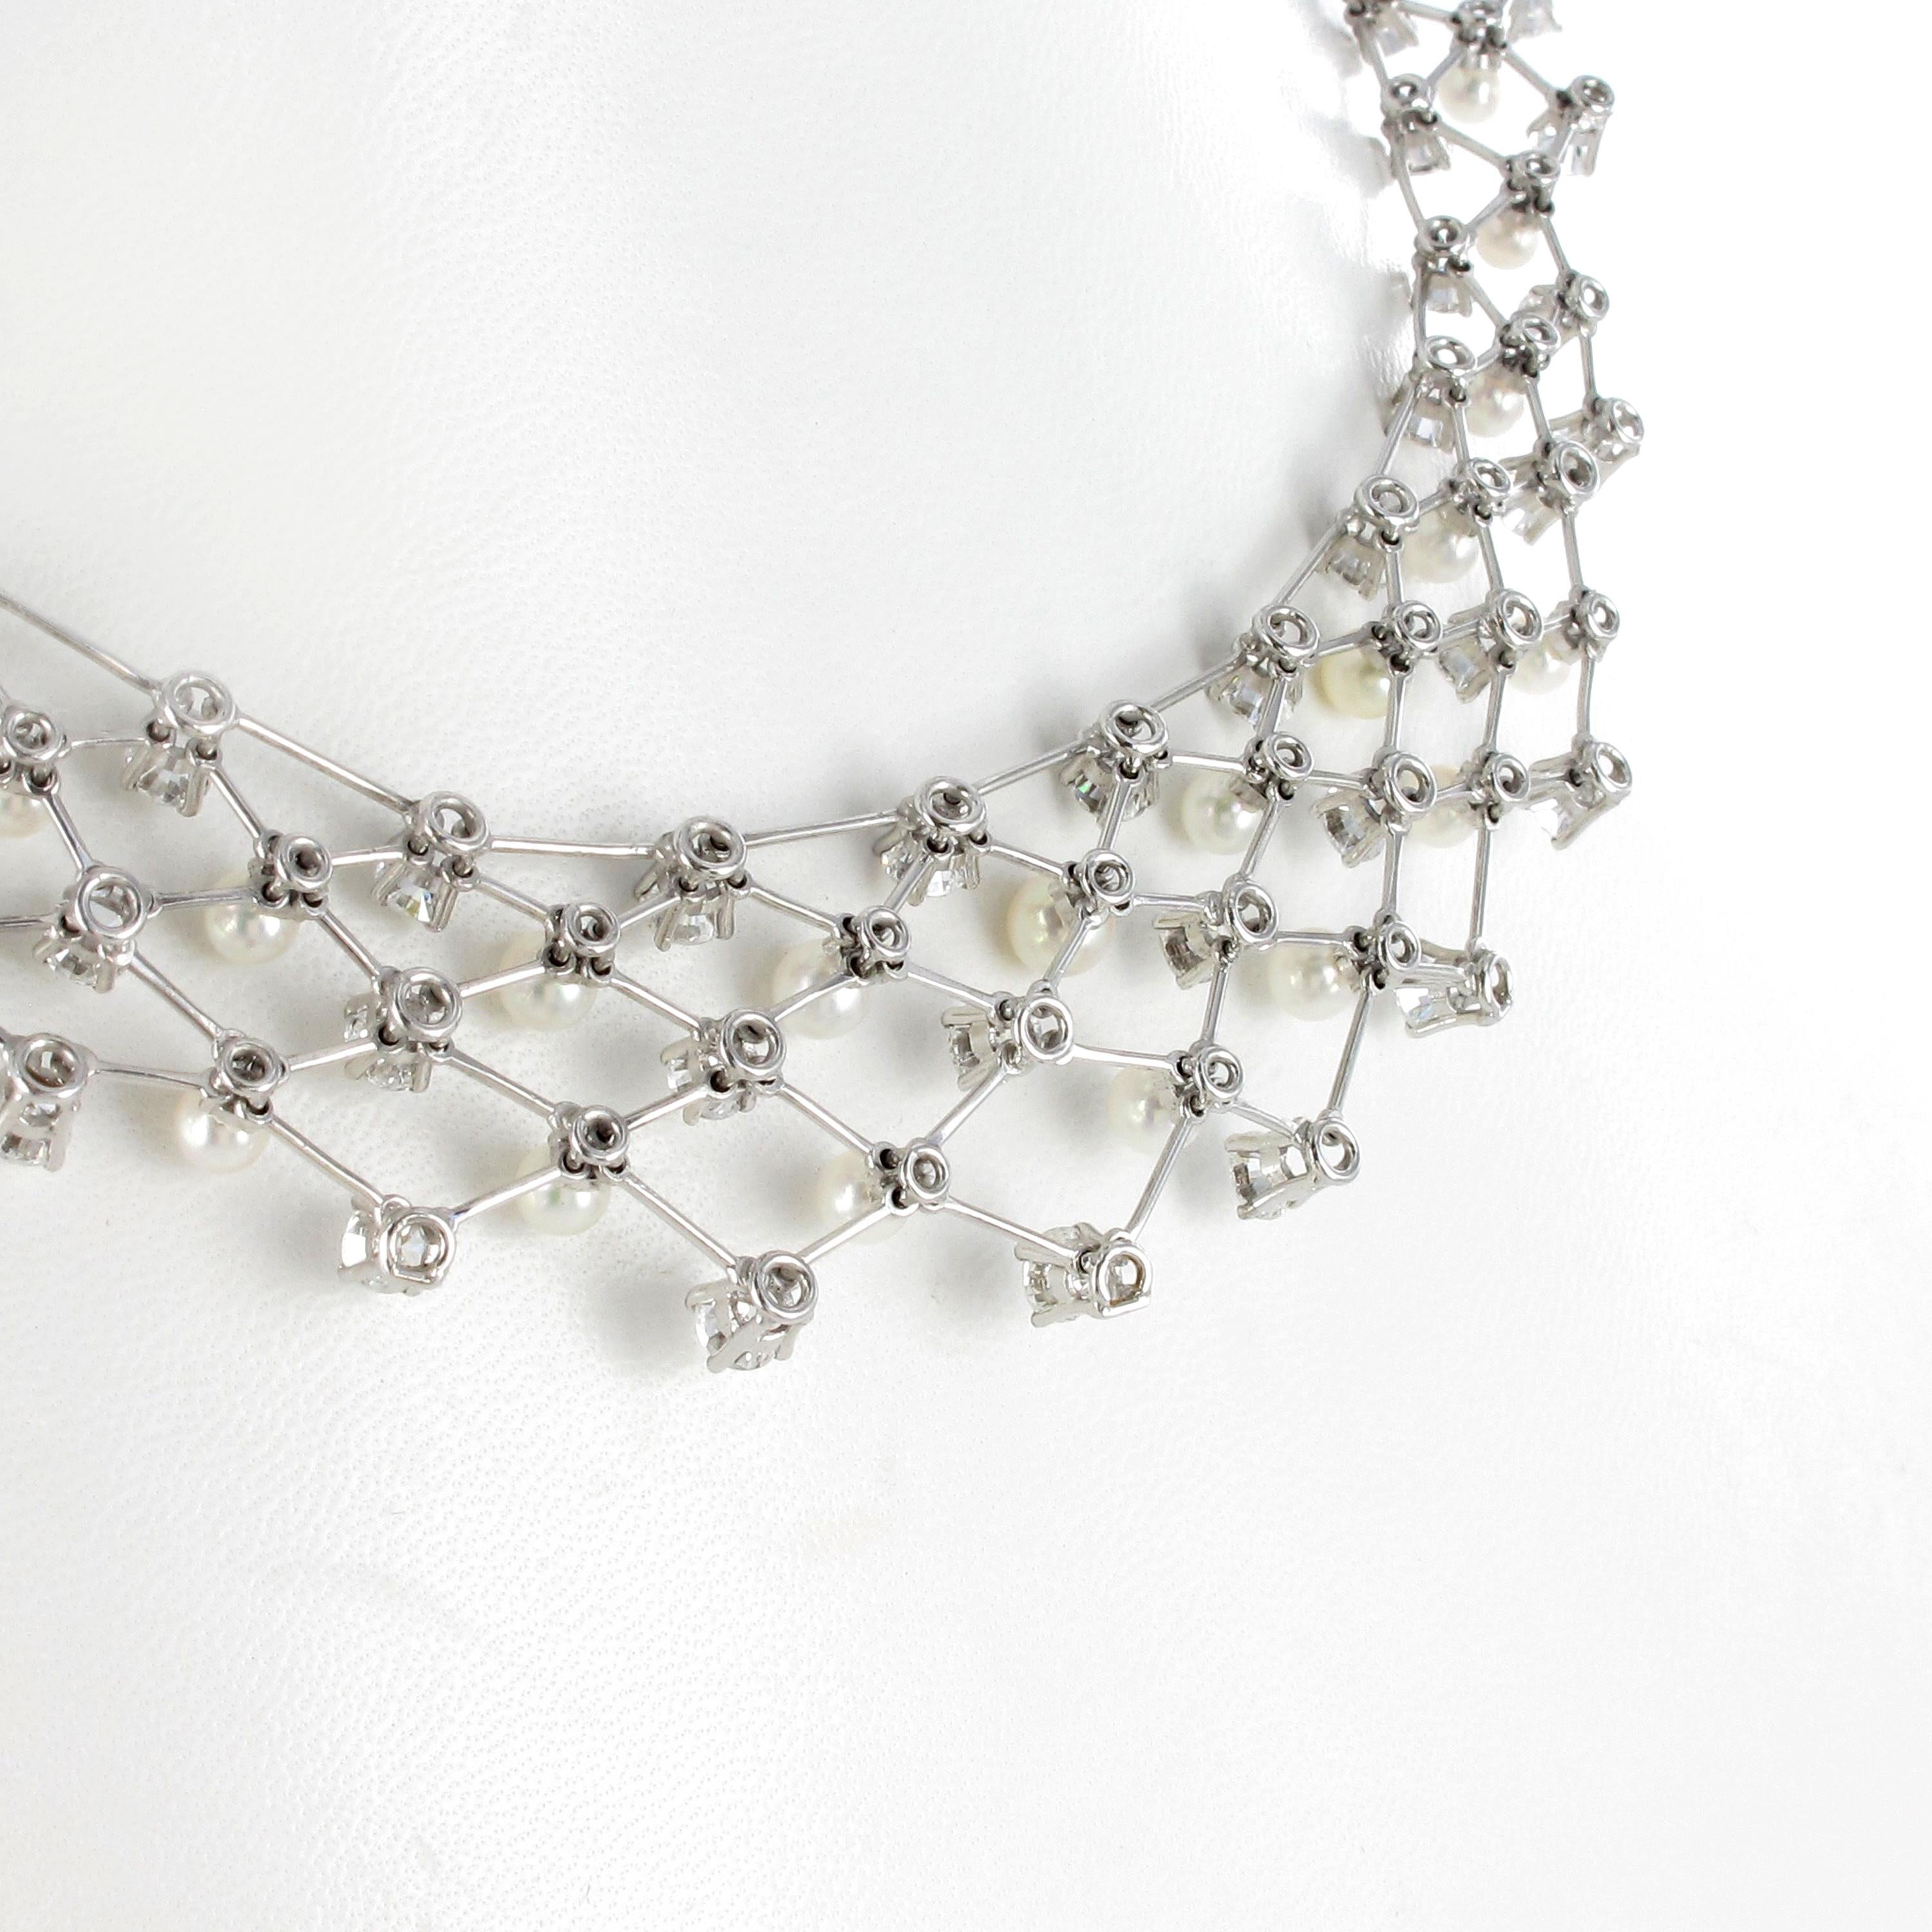 Diamond and Akoya Cultured Pearls Necklace in 950 Platinum In Excellent Condition For Sale In Lucerne, CH